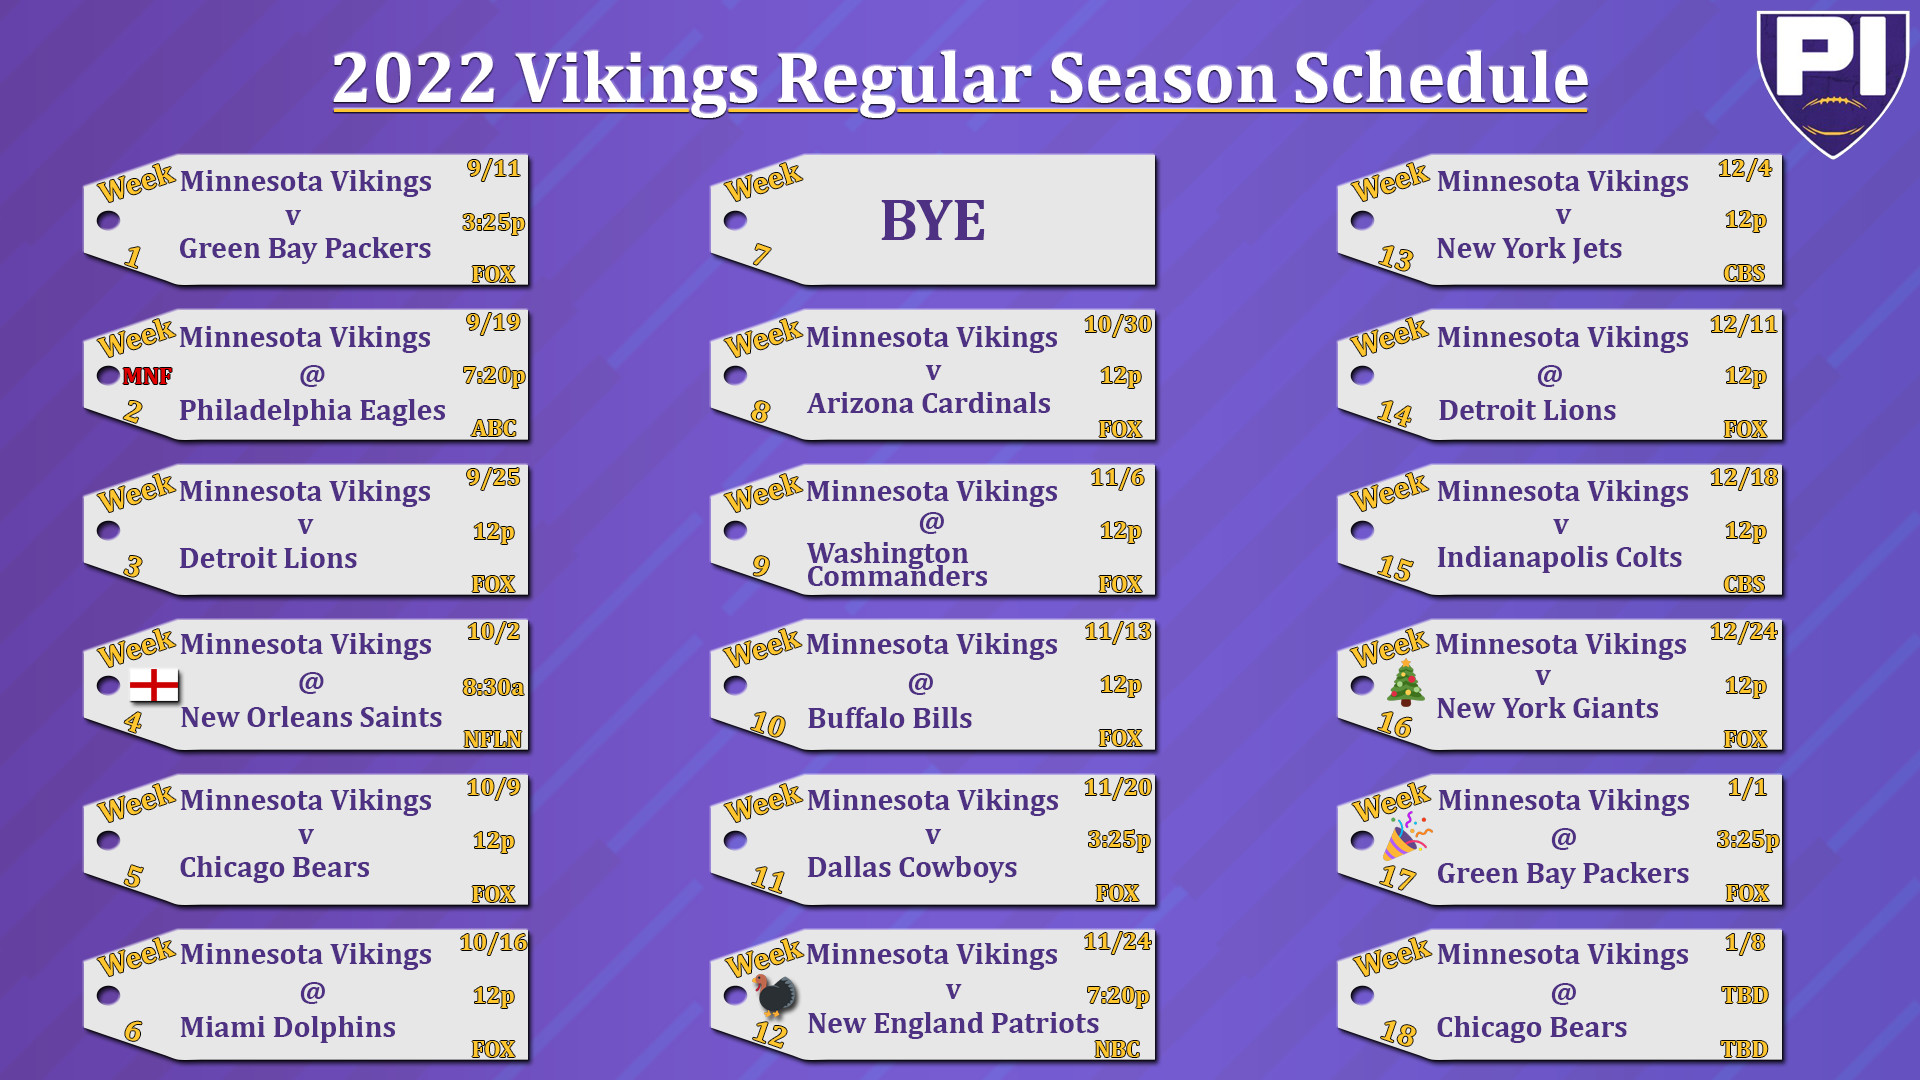 Here's a look at the Vikings schedule with a game-by-game breakdown